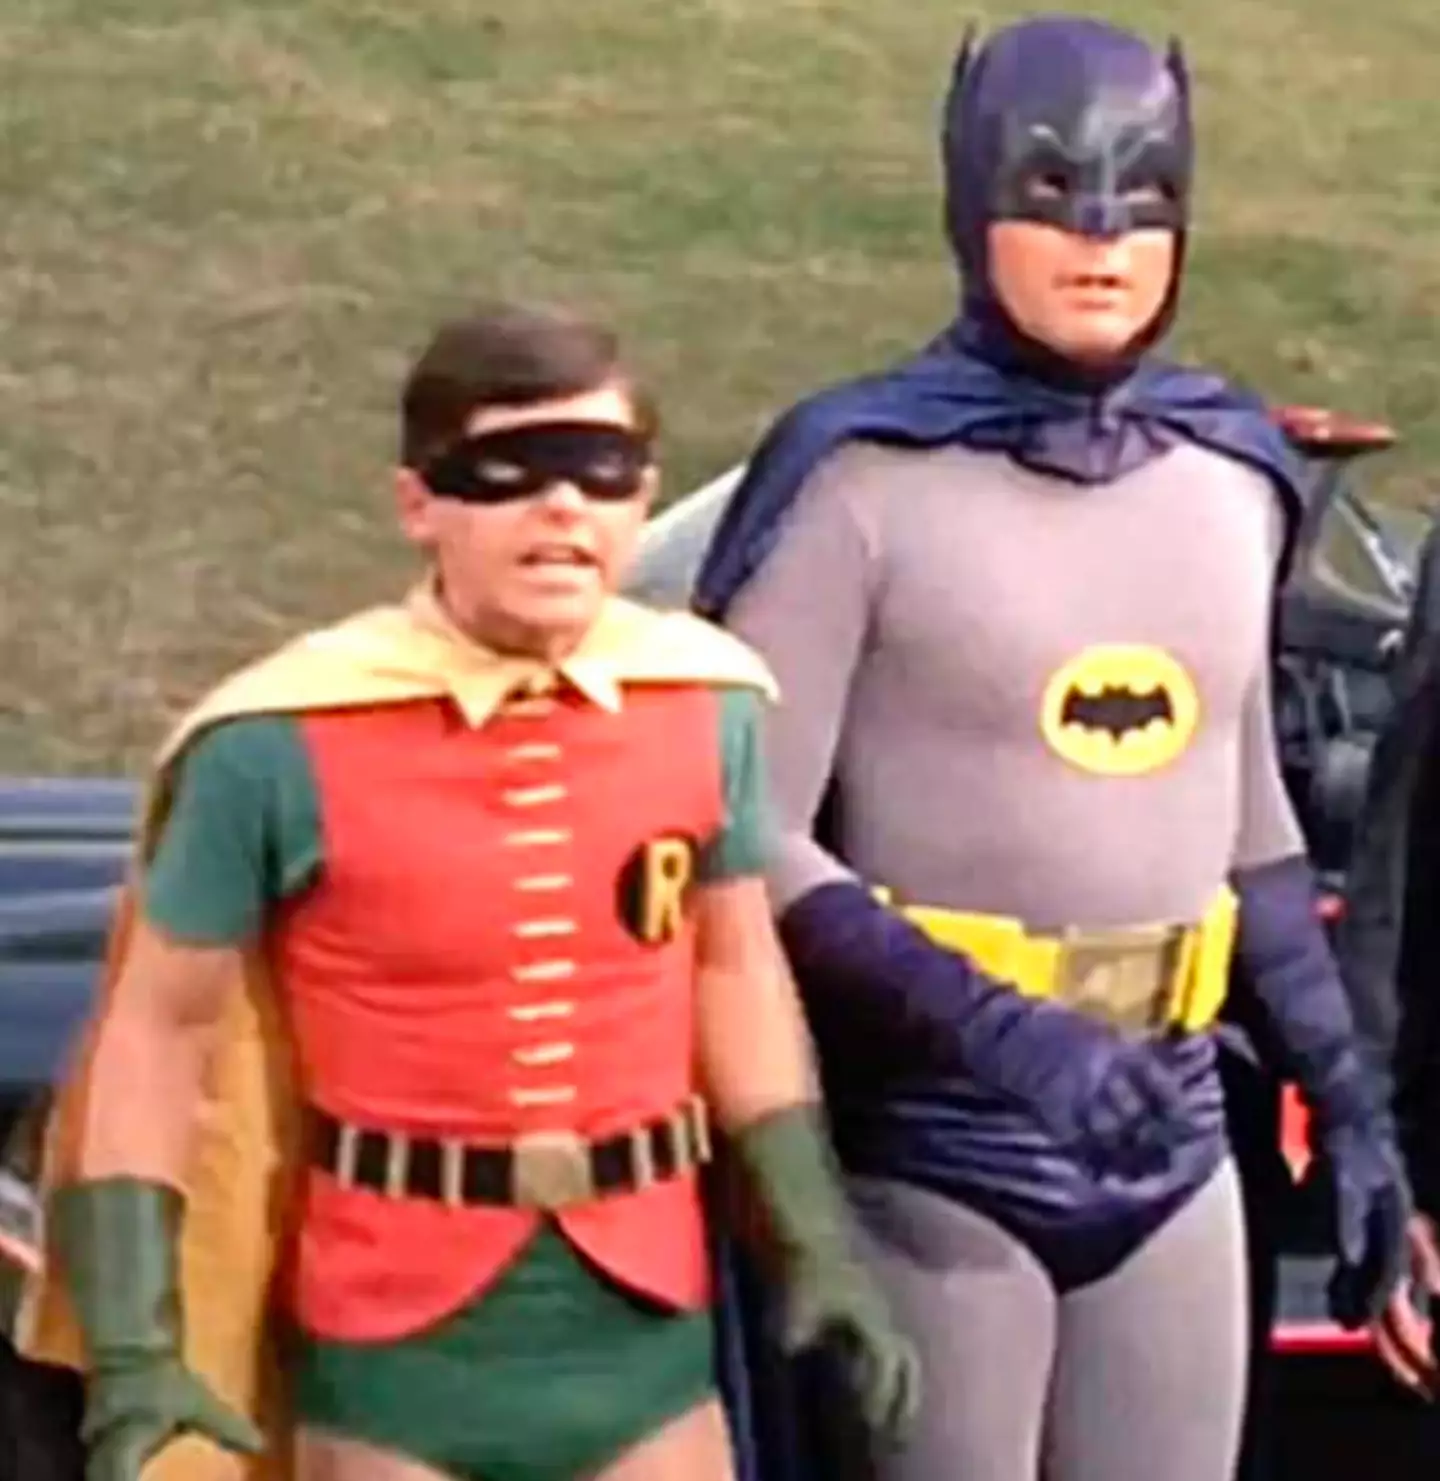 Burt Ward admitted that he received a complaint for the size of his package on TV.